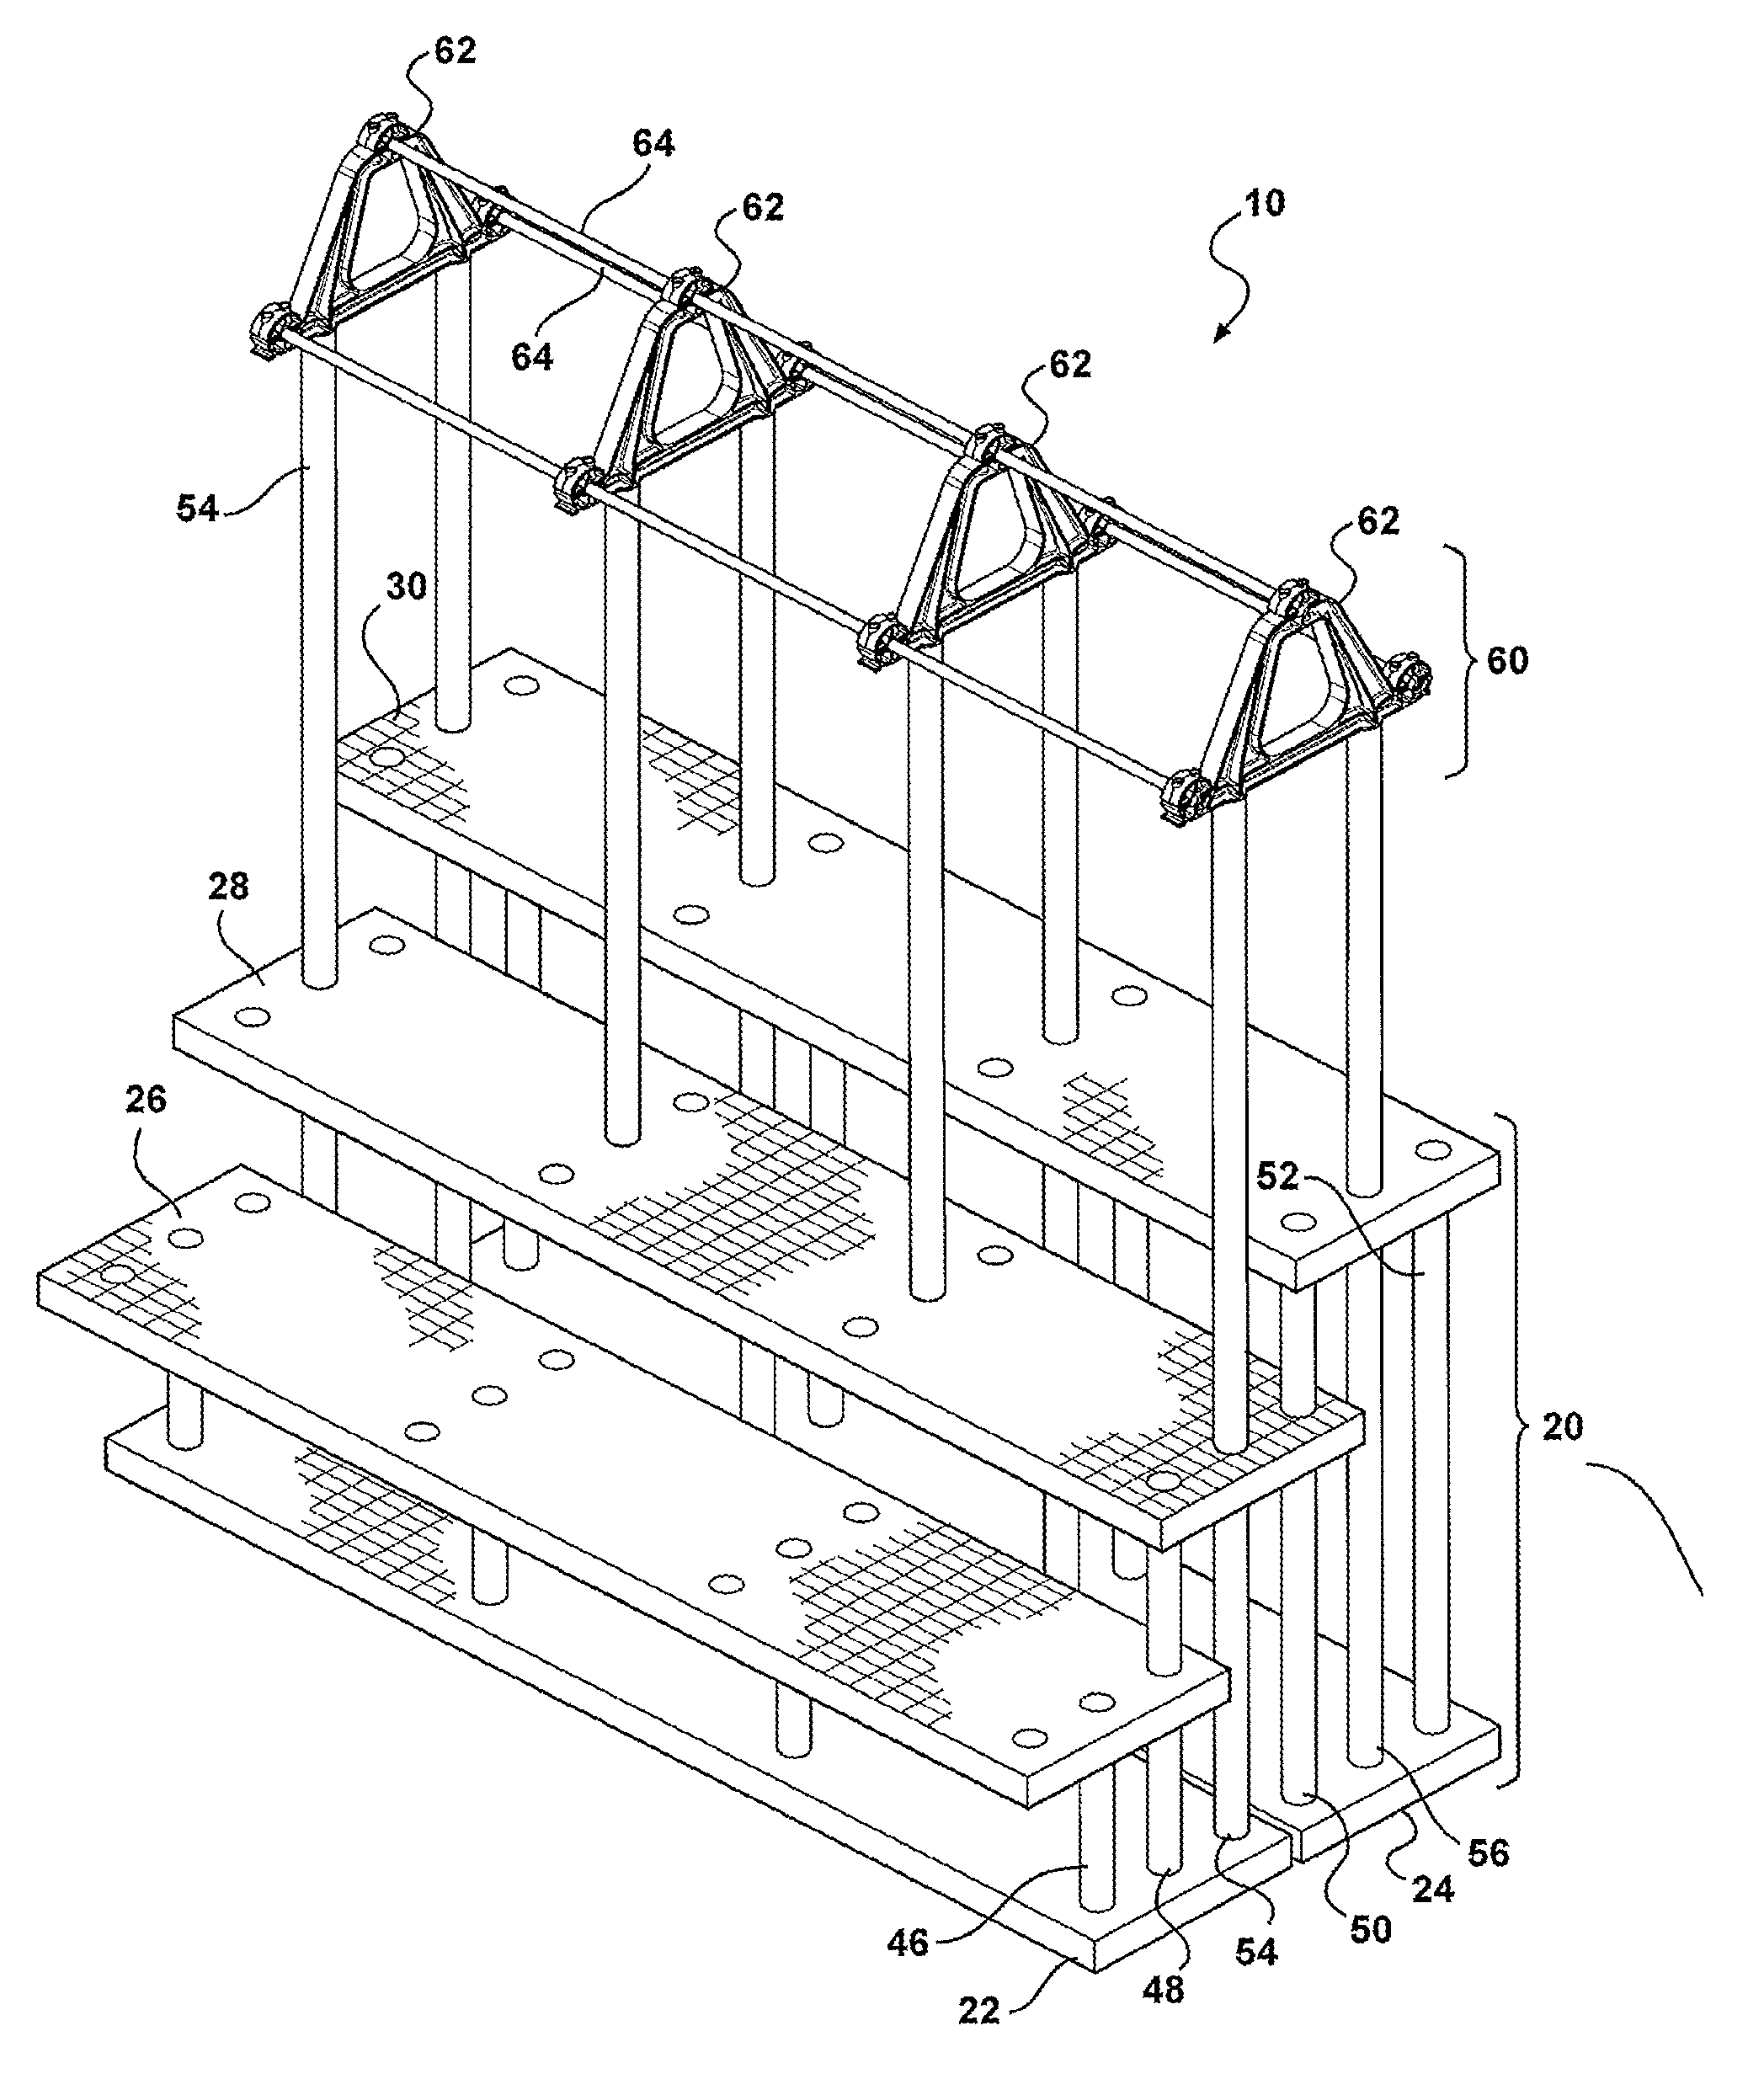 Support structure for hanging plants